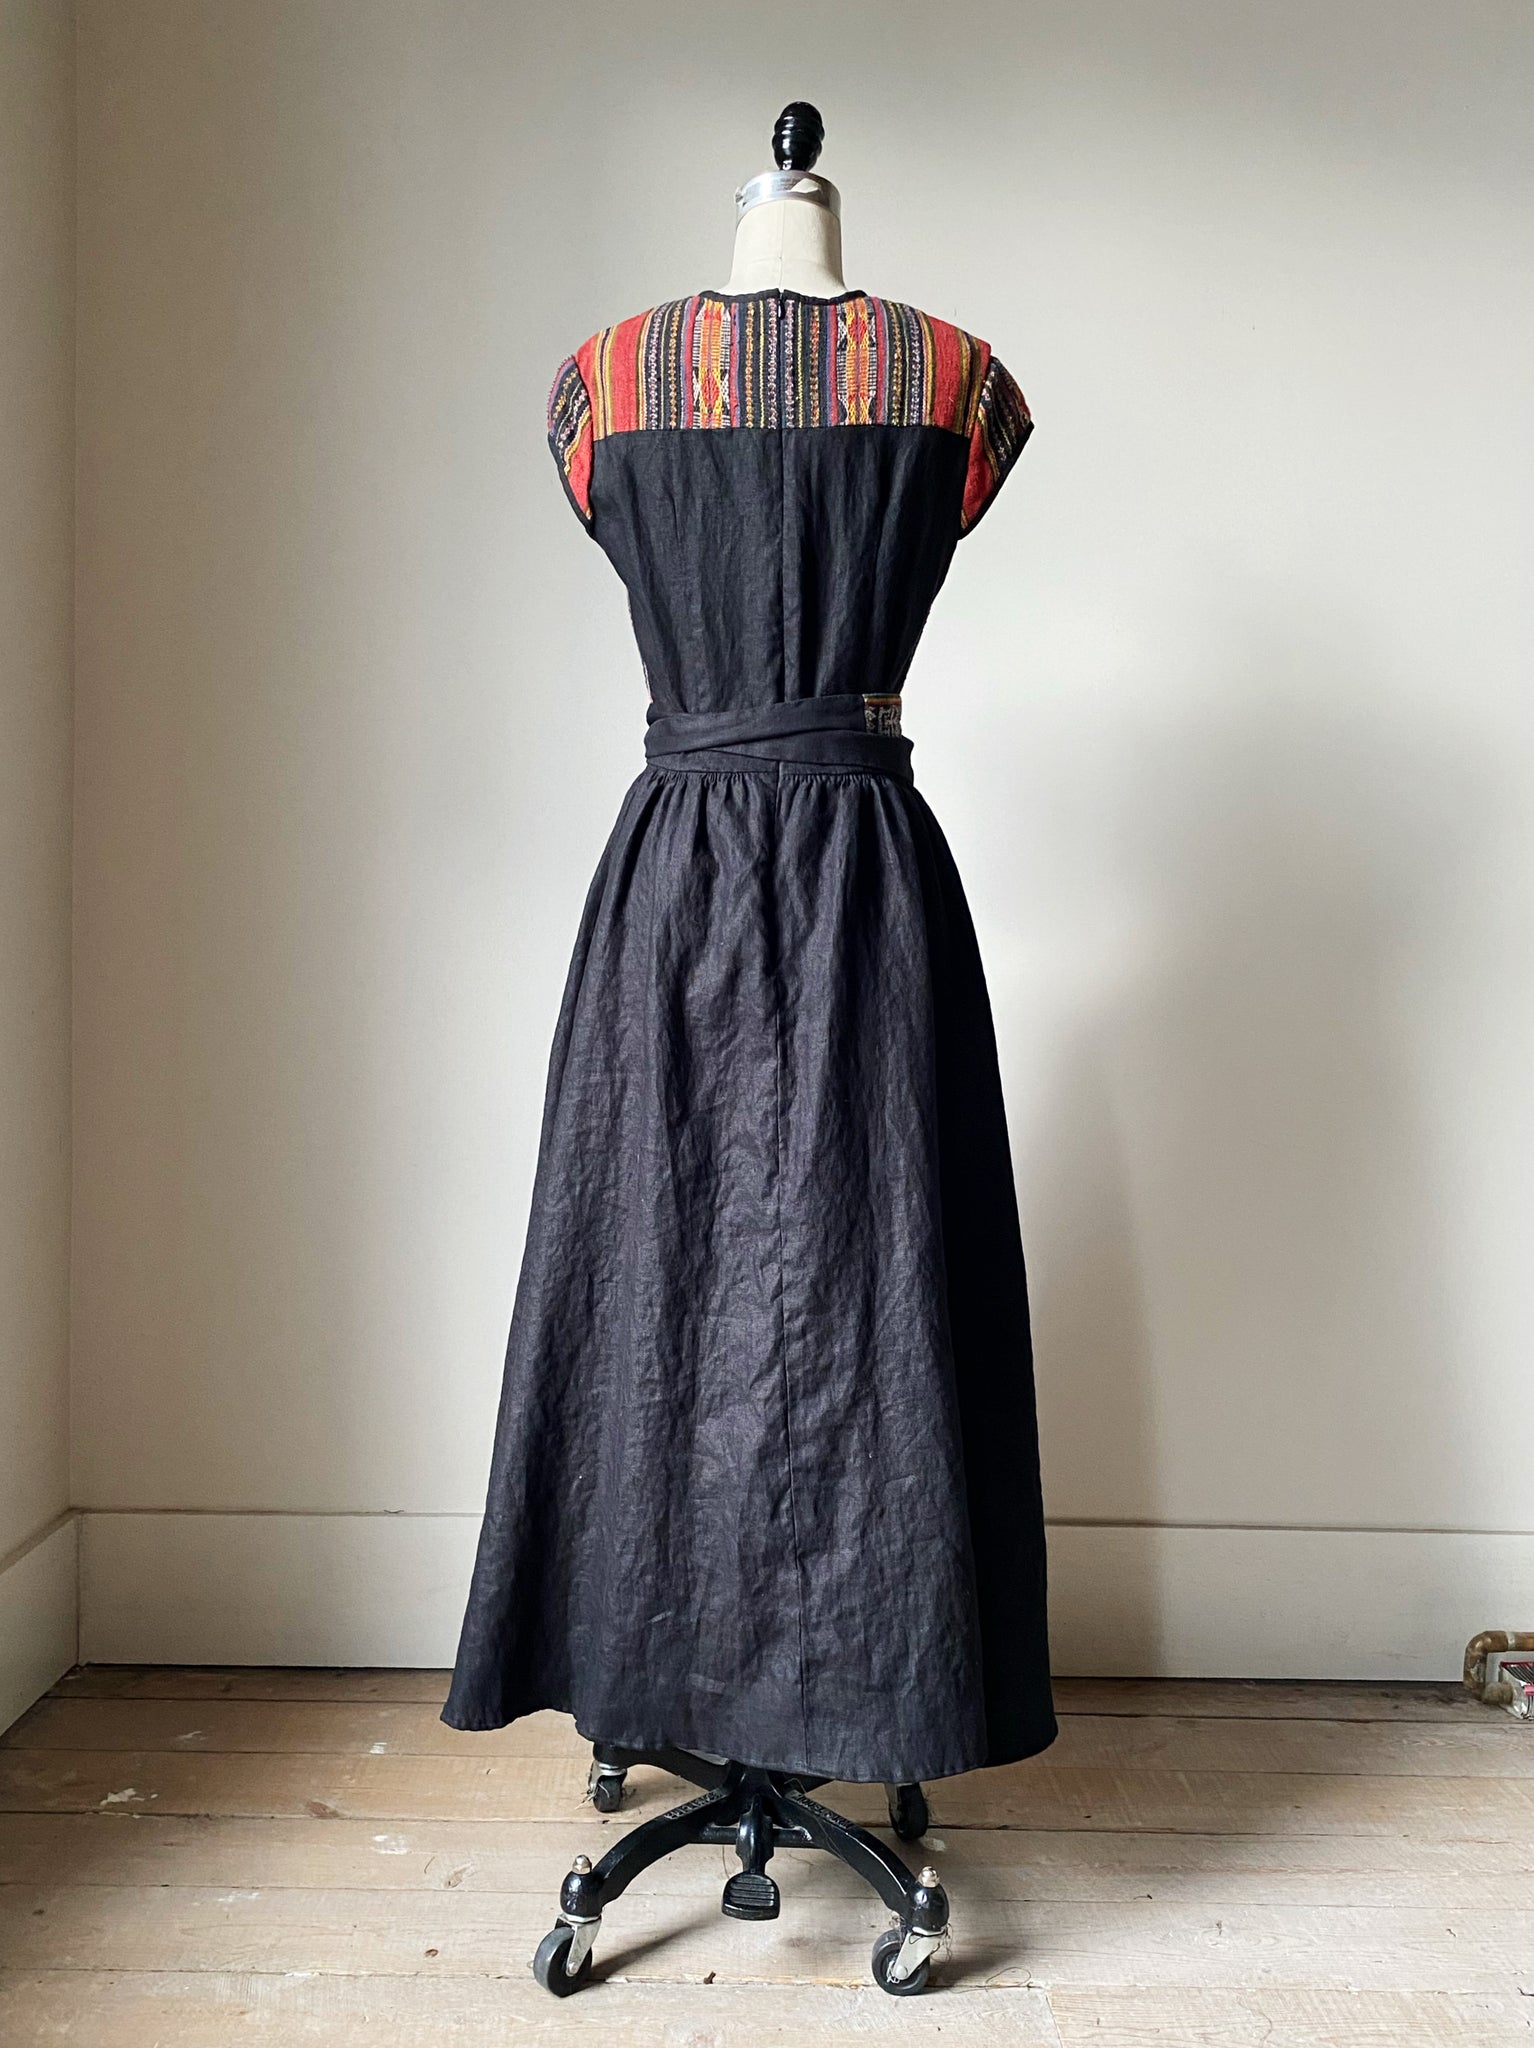 lillian dress in patched handwoven textile from thailand with black linen